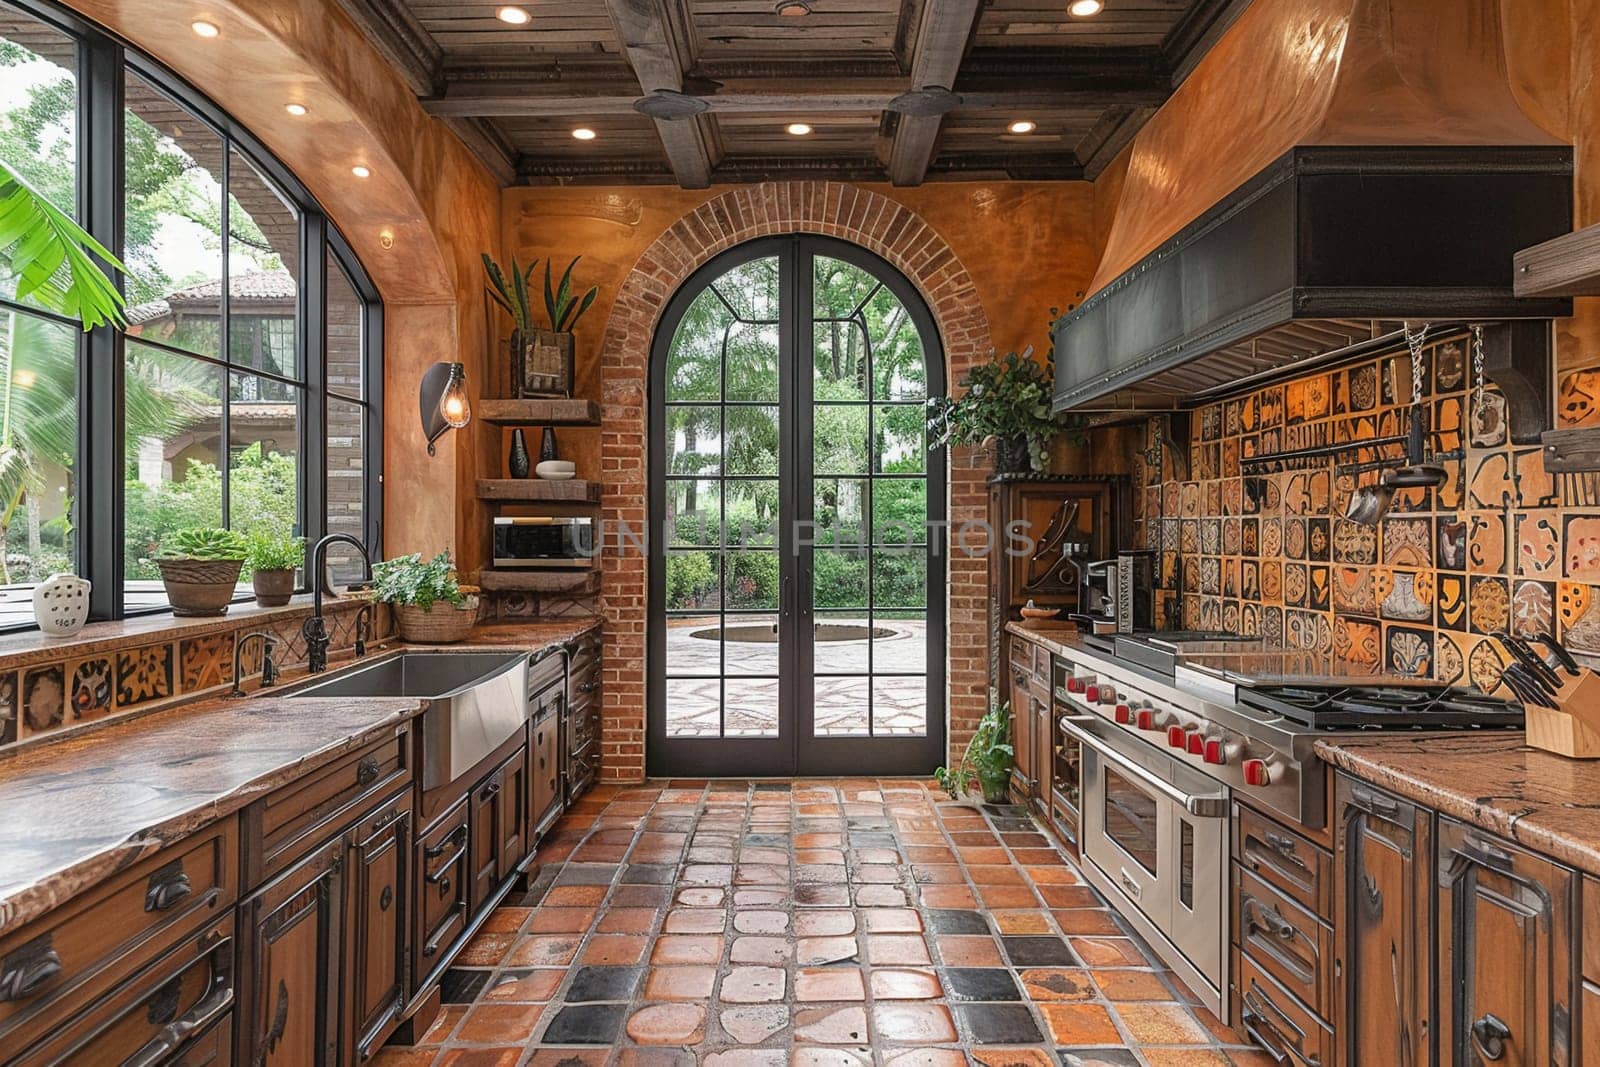 Mediterranean-style kitchen with terracotta tiles and iron accents